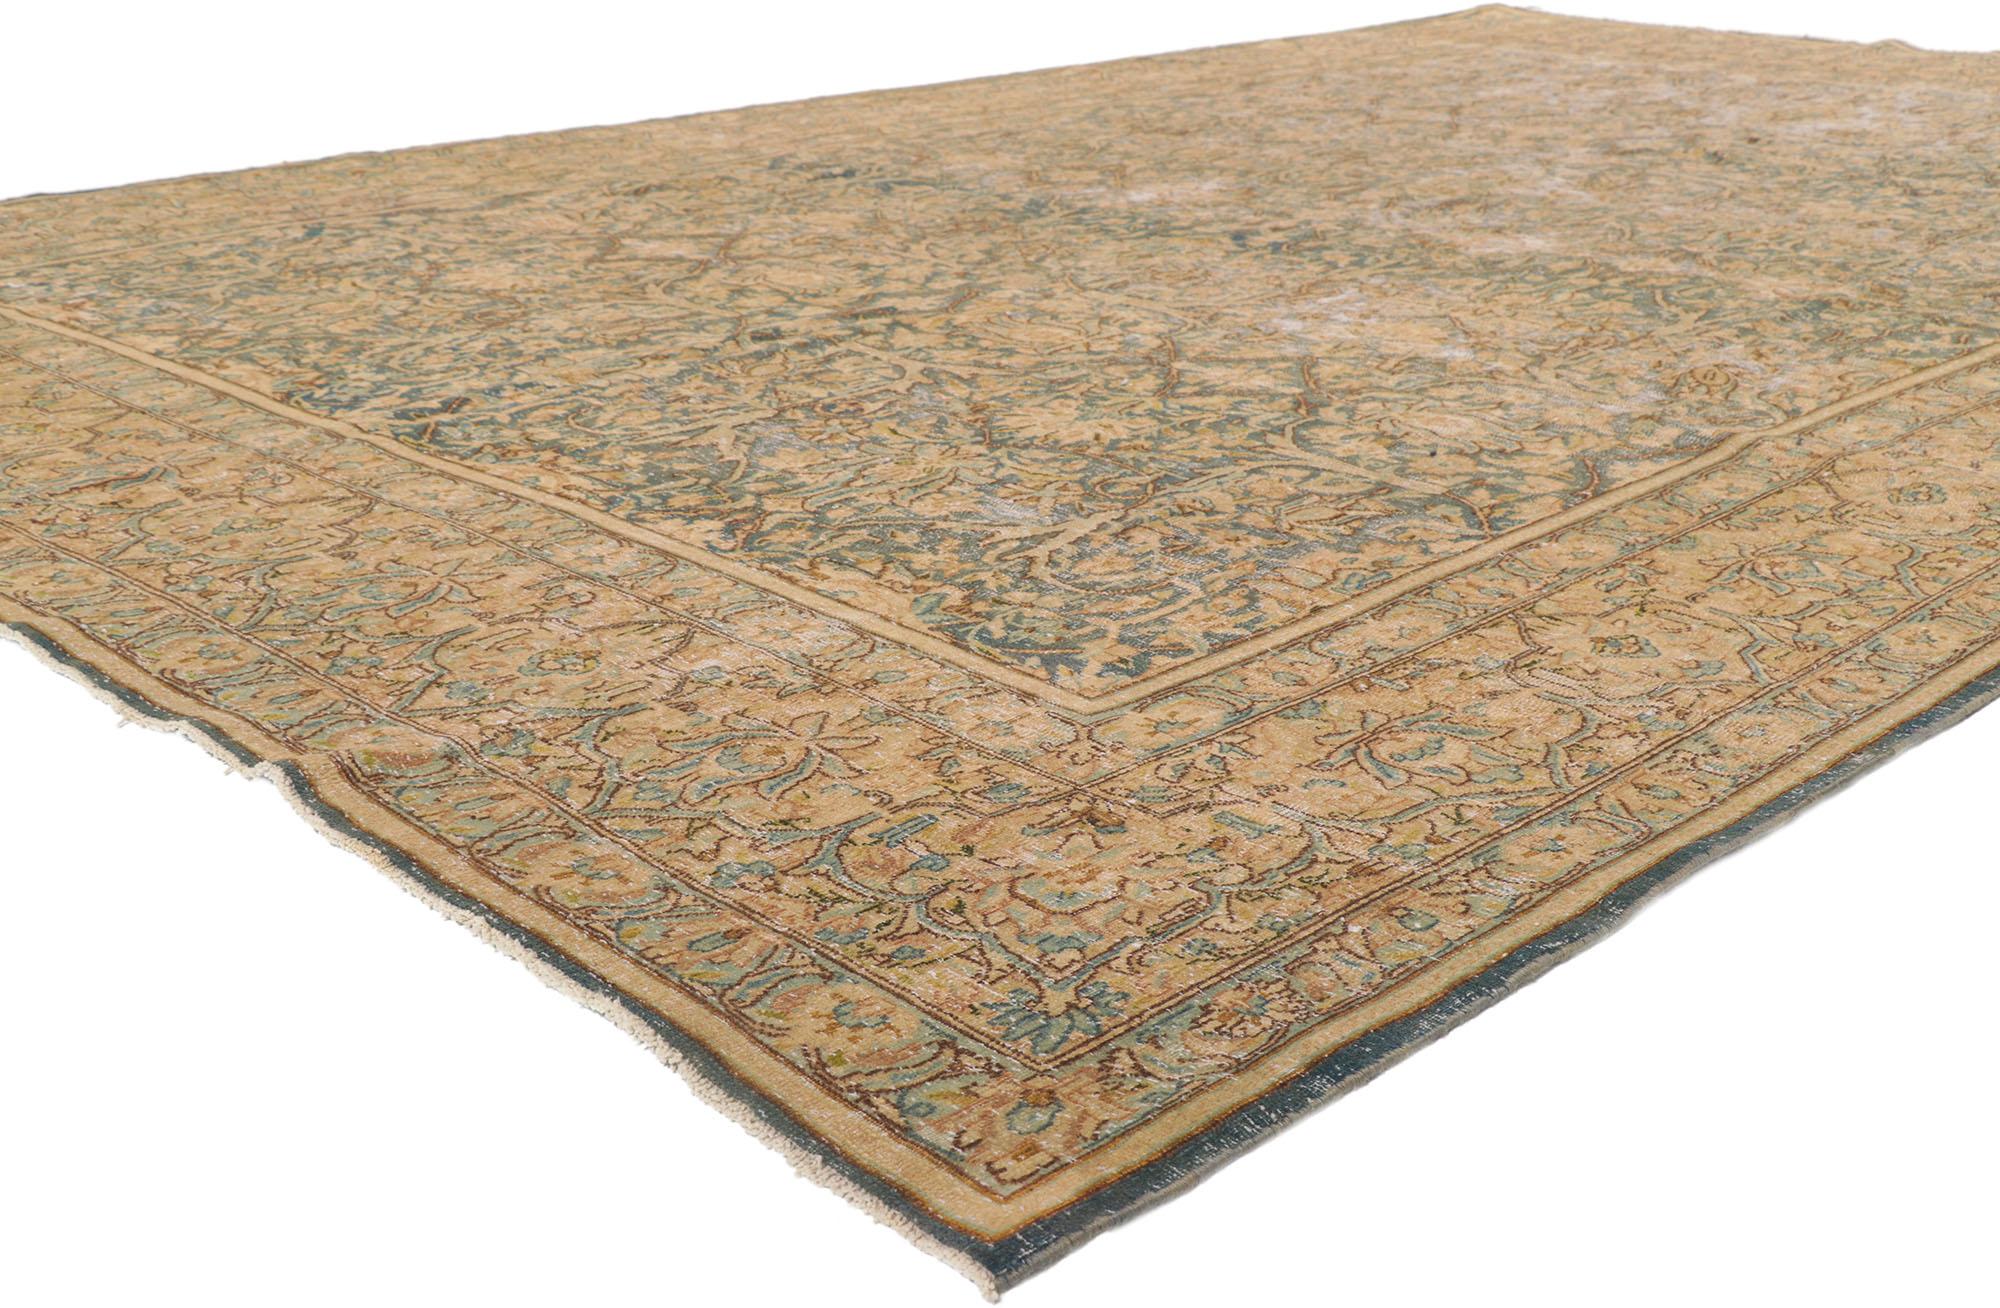 53765 Antique-Worn Persian Kerman Rug, 08'09 x 13'05.
Featuring a traditional botanical design and exuding rugged beauty, this hand-knotted wool distressed antique Persian Kerman rug effortlessly captures the essence of nostalgic charm. The tranquil